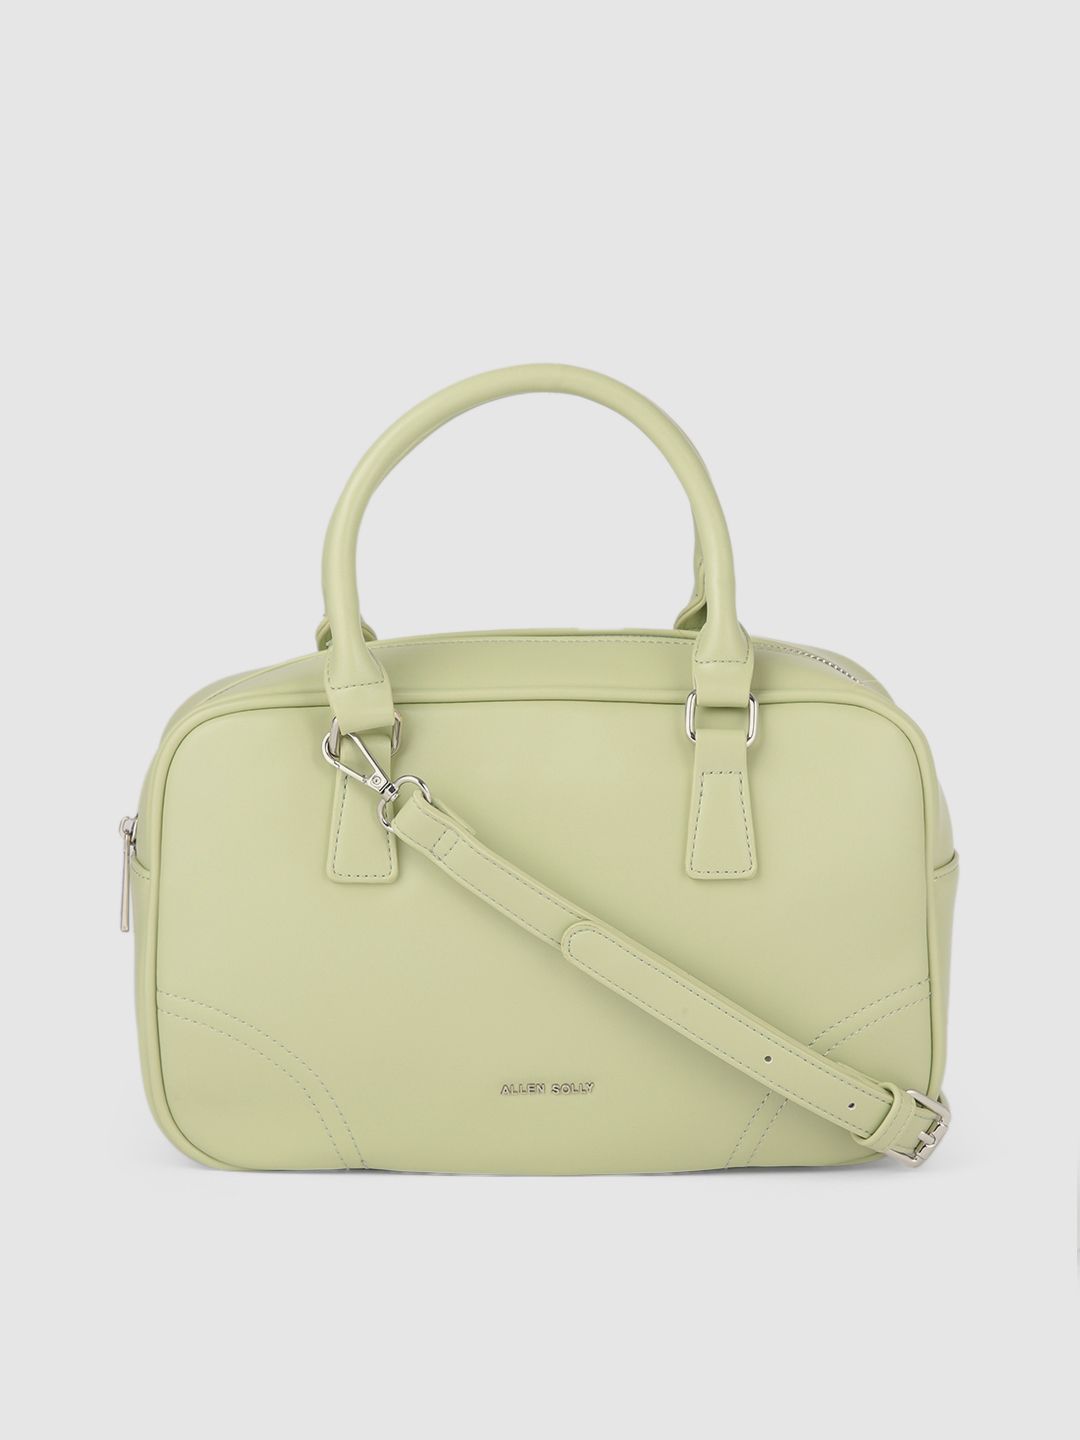 Allen Solly Green PU Structured Handheld Bag Price in India